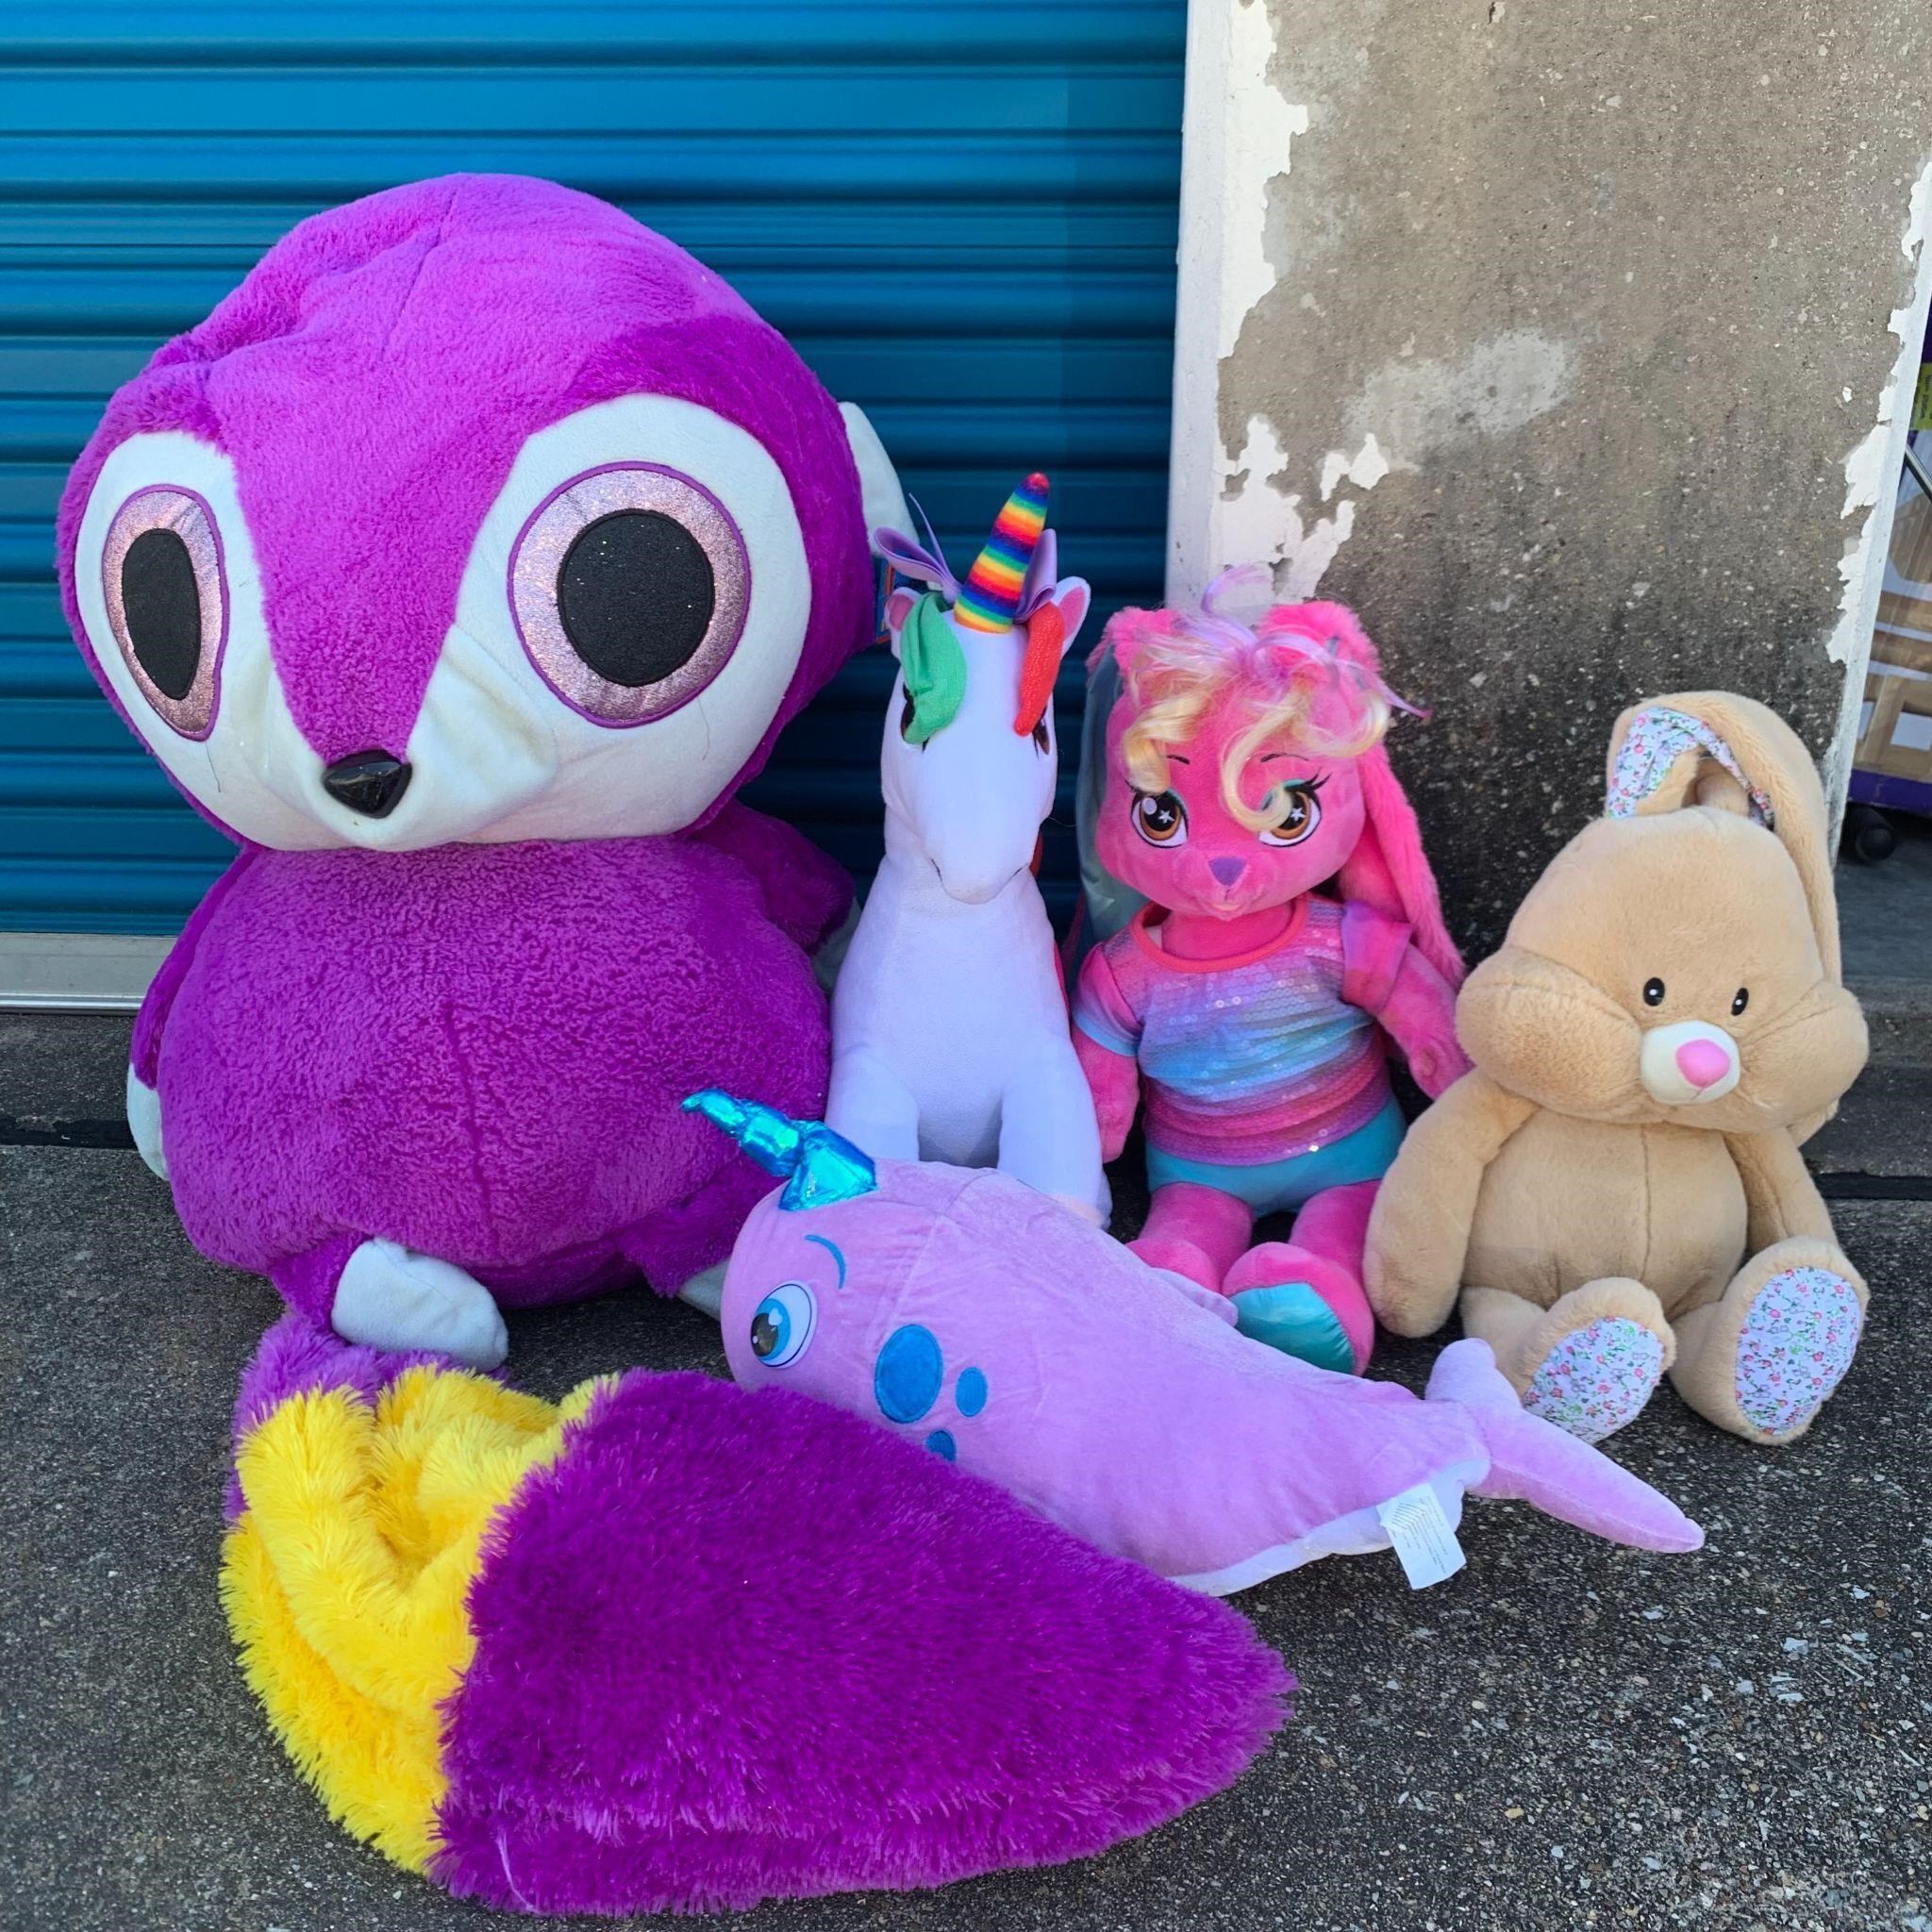 Six Flags Giant Plush and more